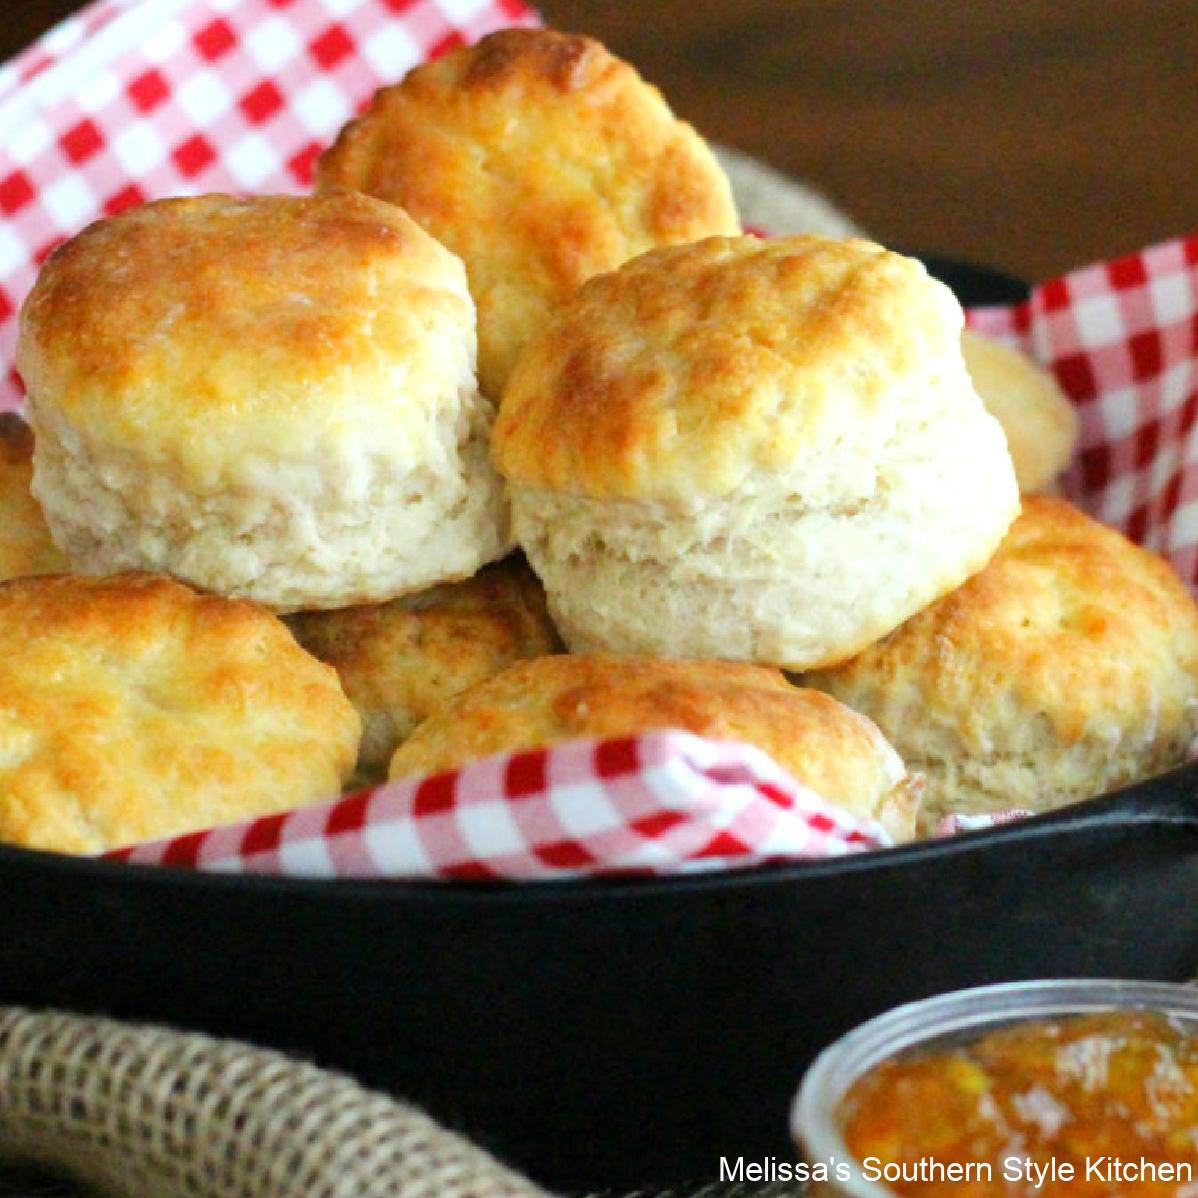  Grandma's secret recipe for the best biscuits in the South